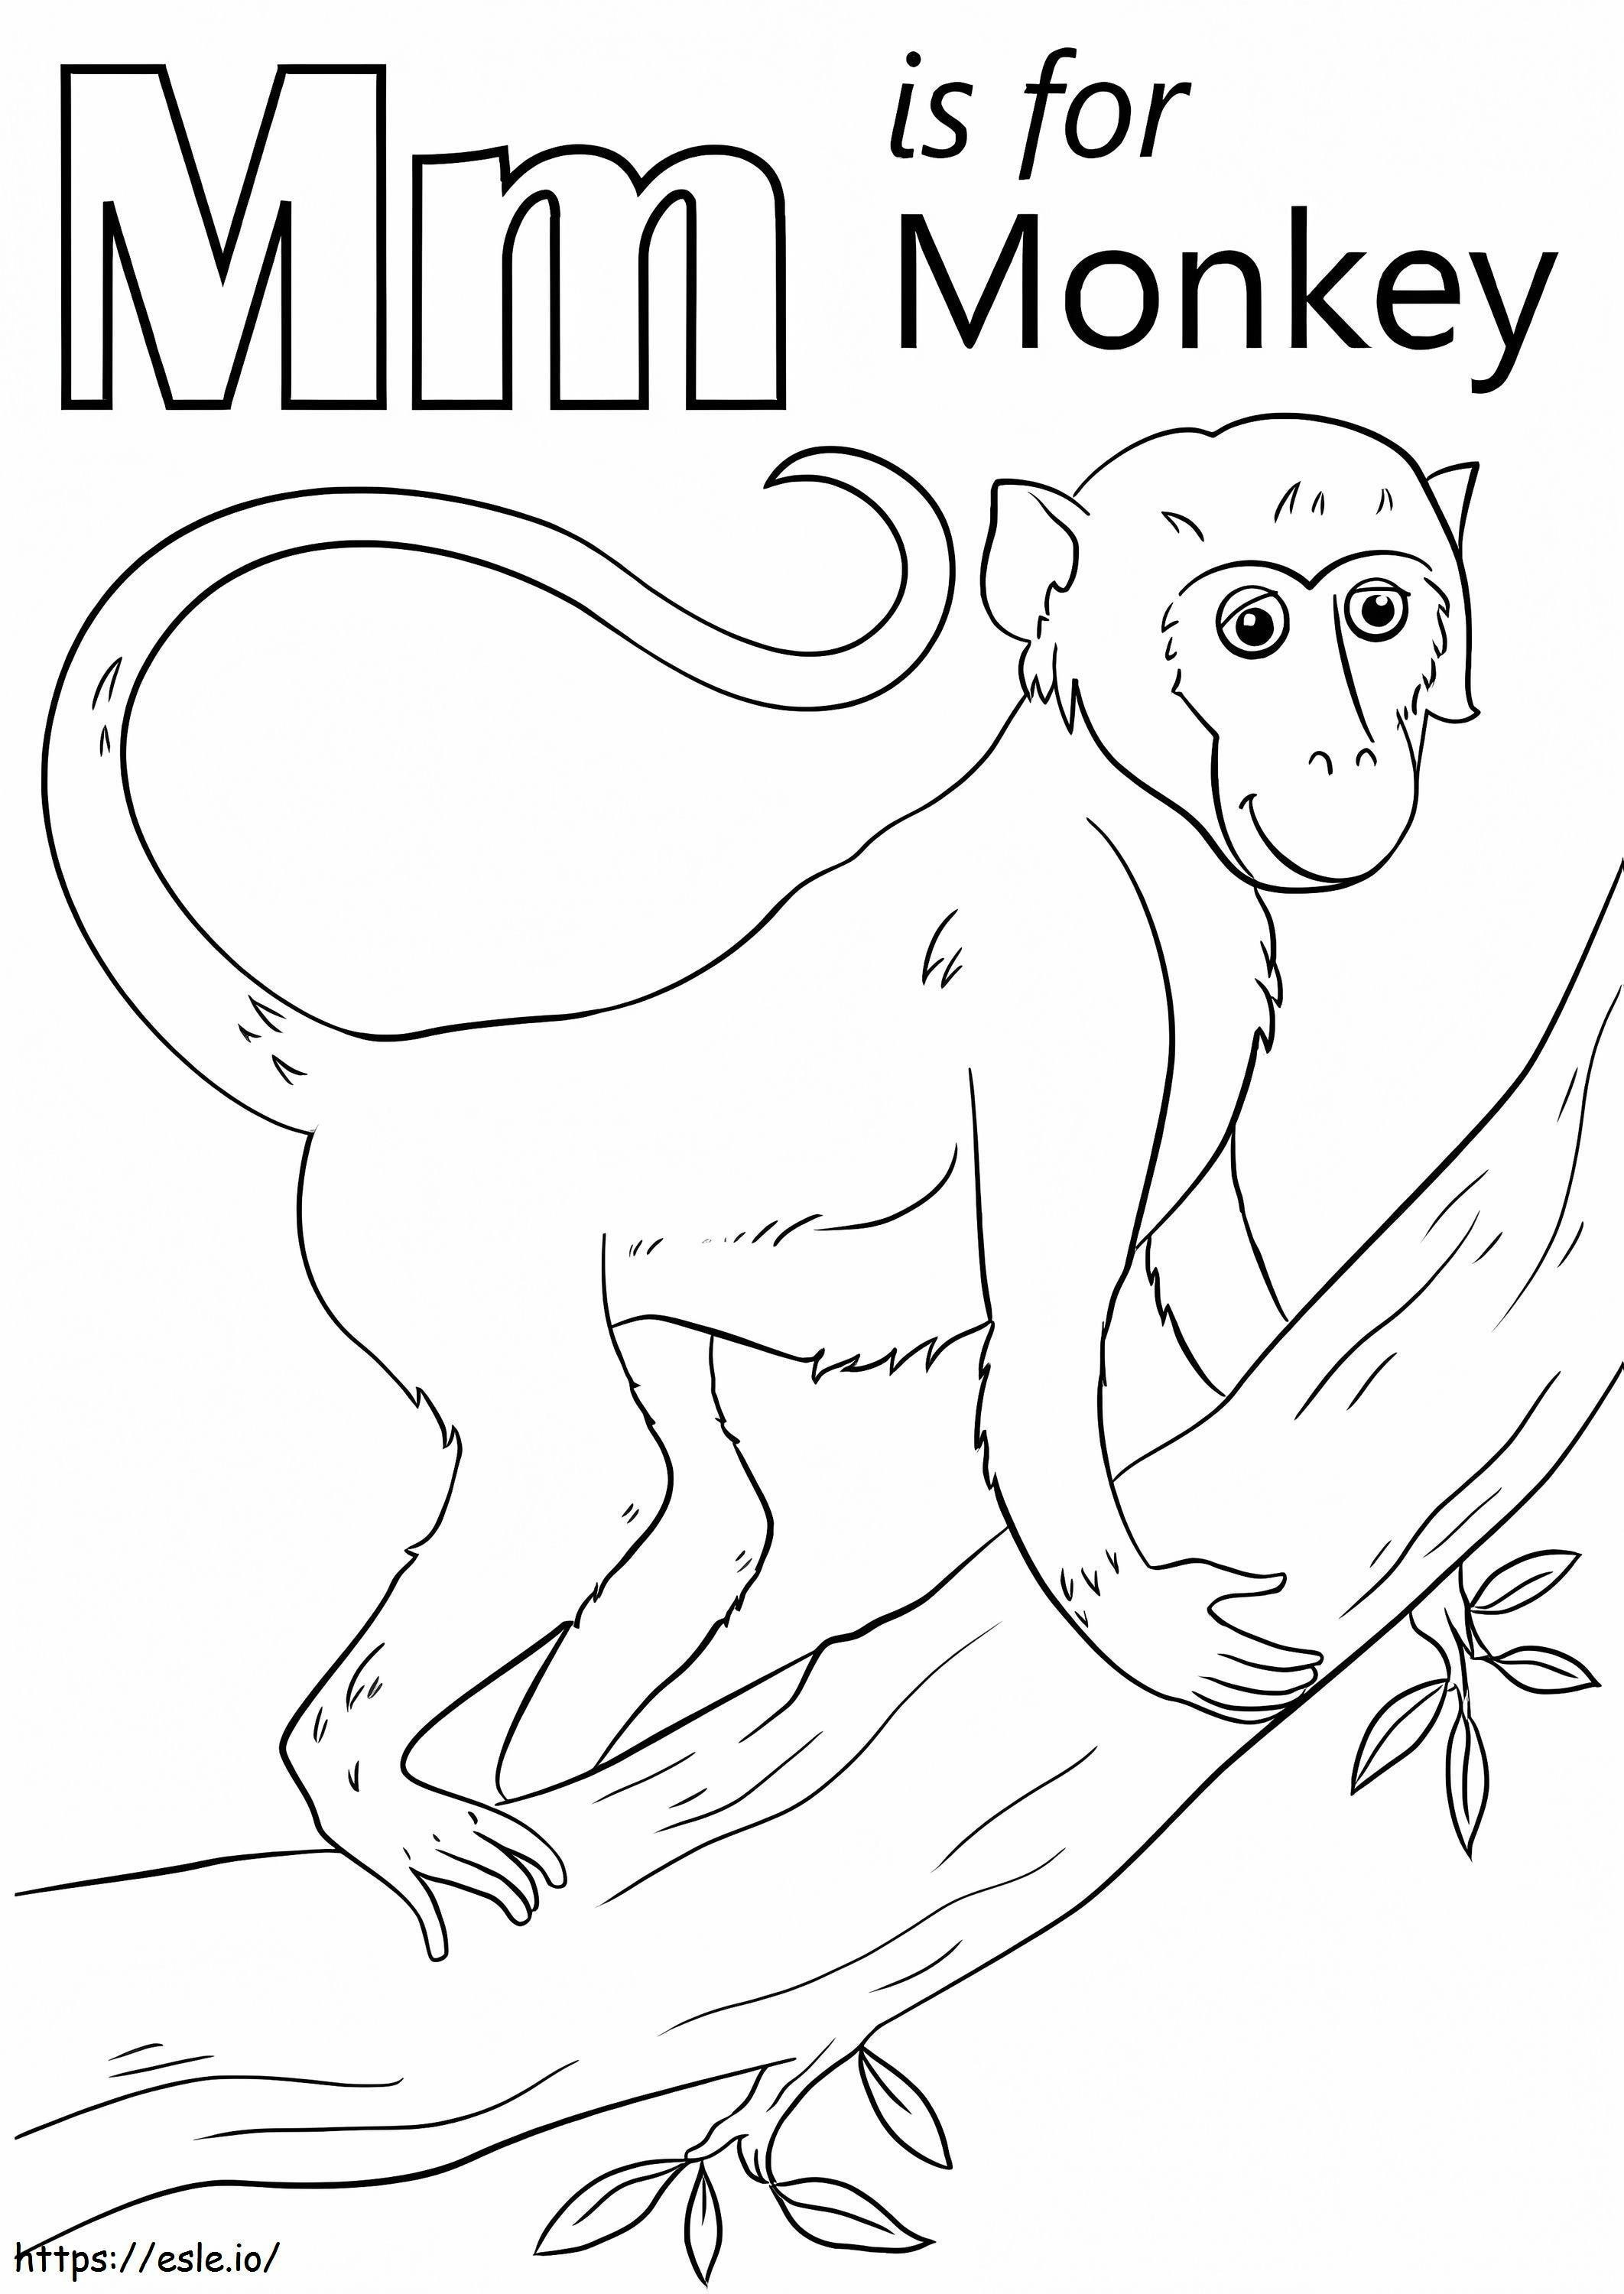 Letter M Monkey Climbing Tree coloring page